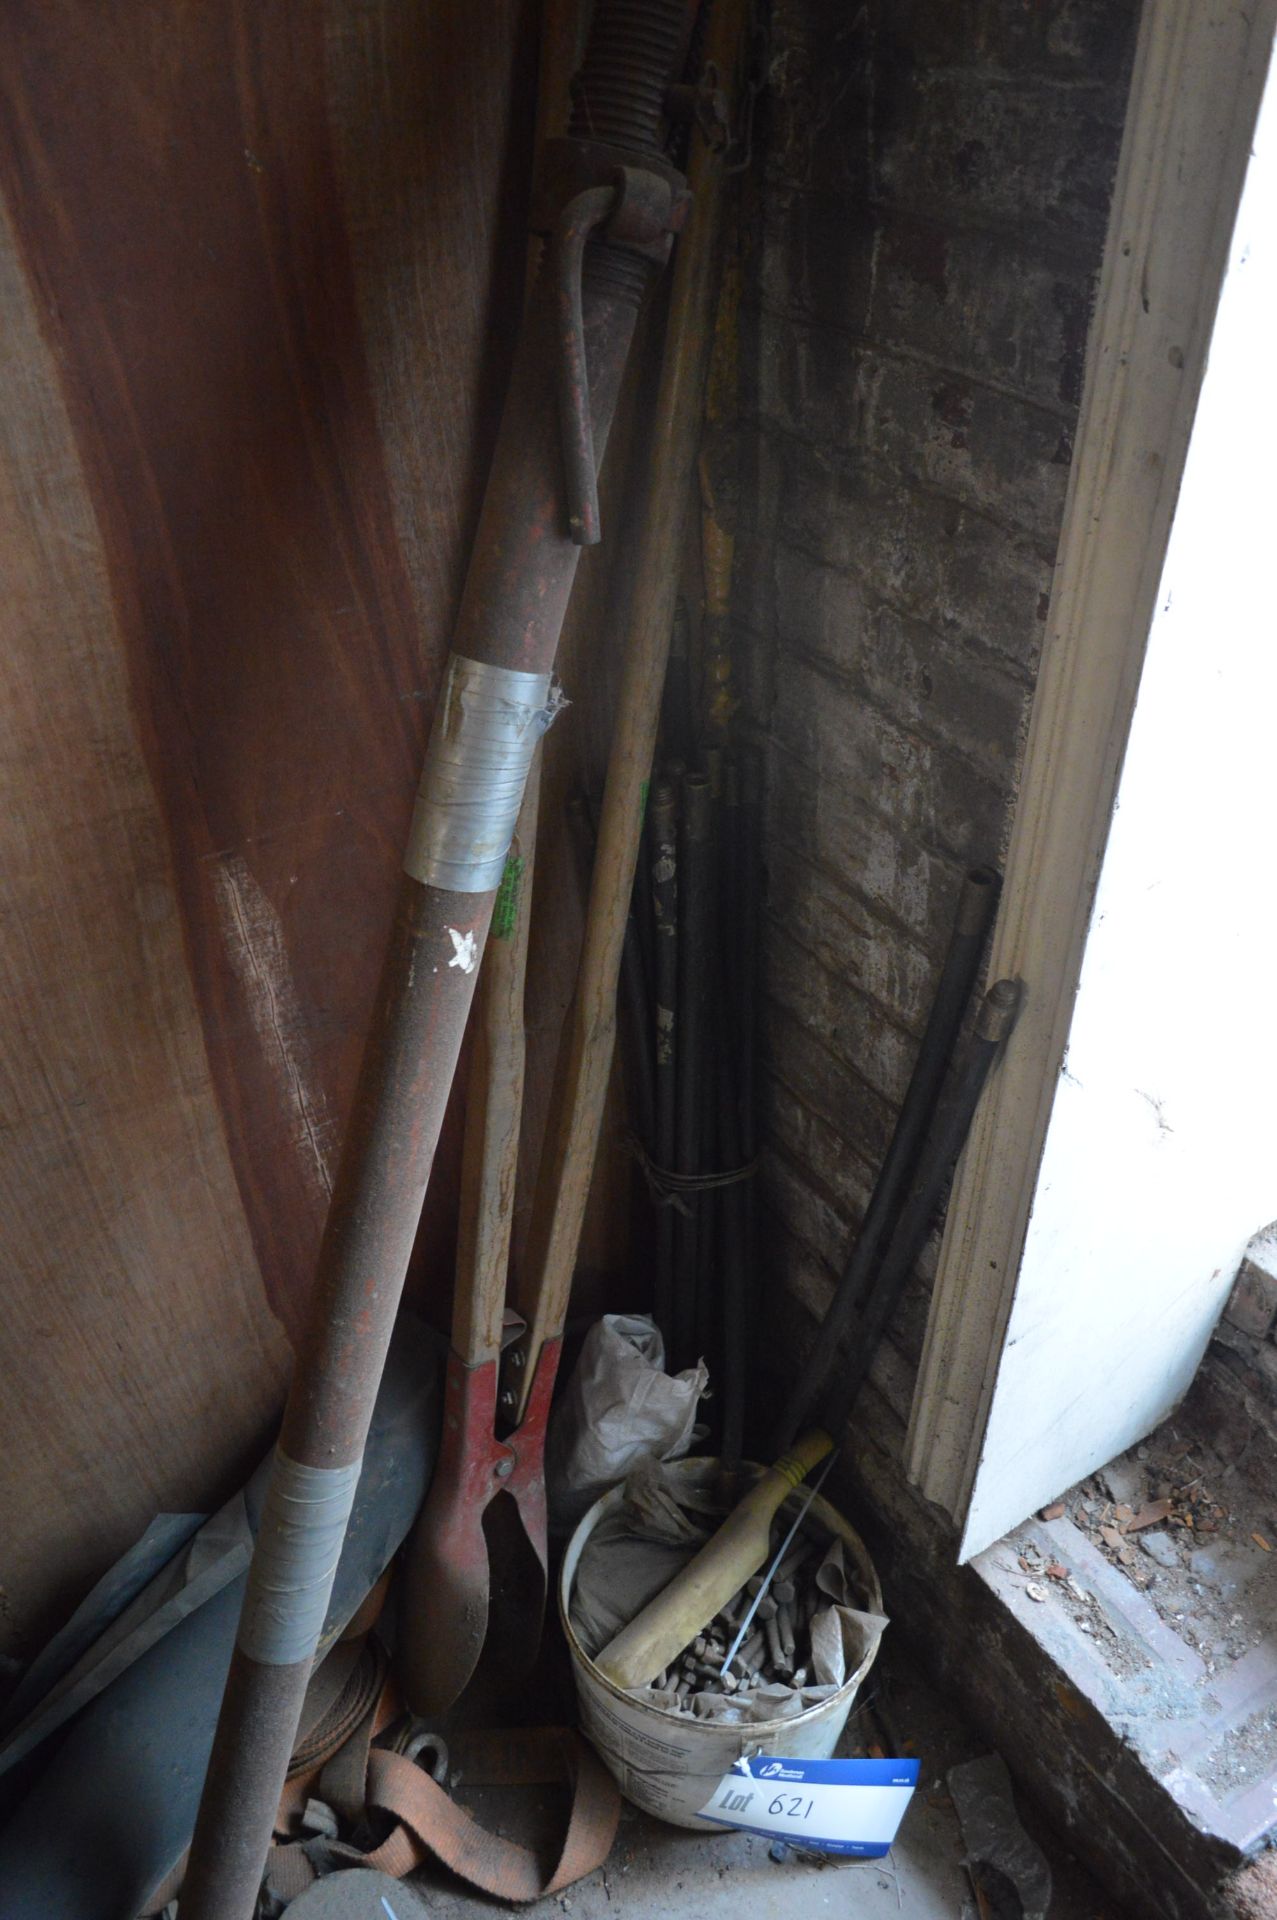 Drain Rods and Equipment, as set out